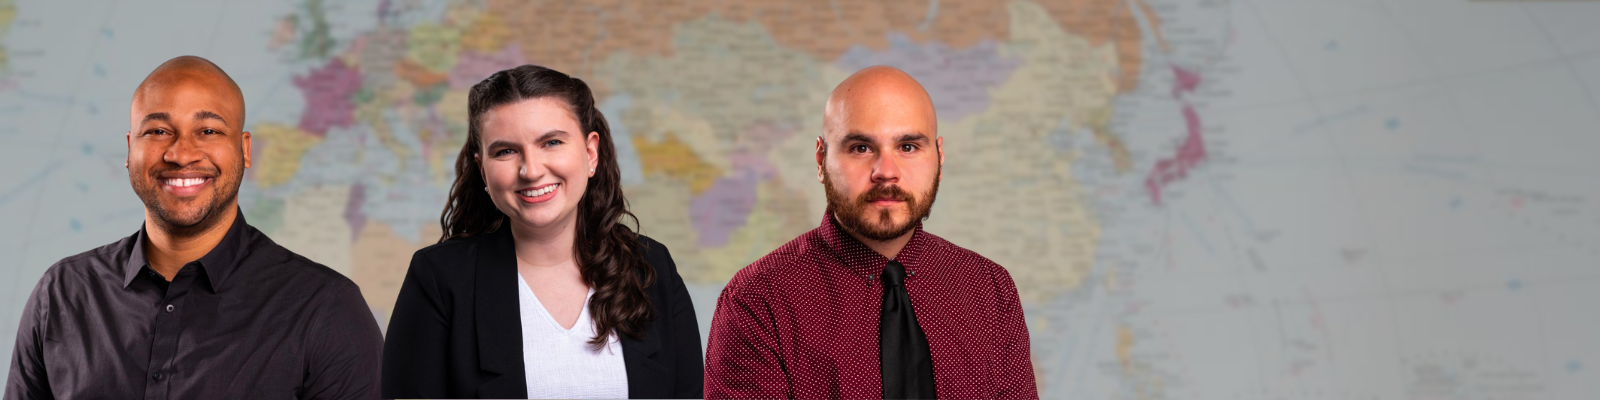 Headshots of Jeremy Beckford, Miranda Delawalla, and Santiago Estrada. In the background is a world map.